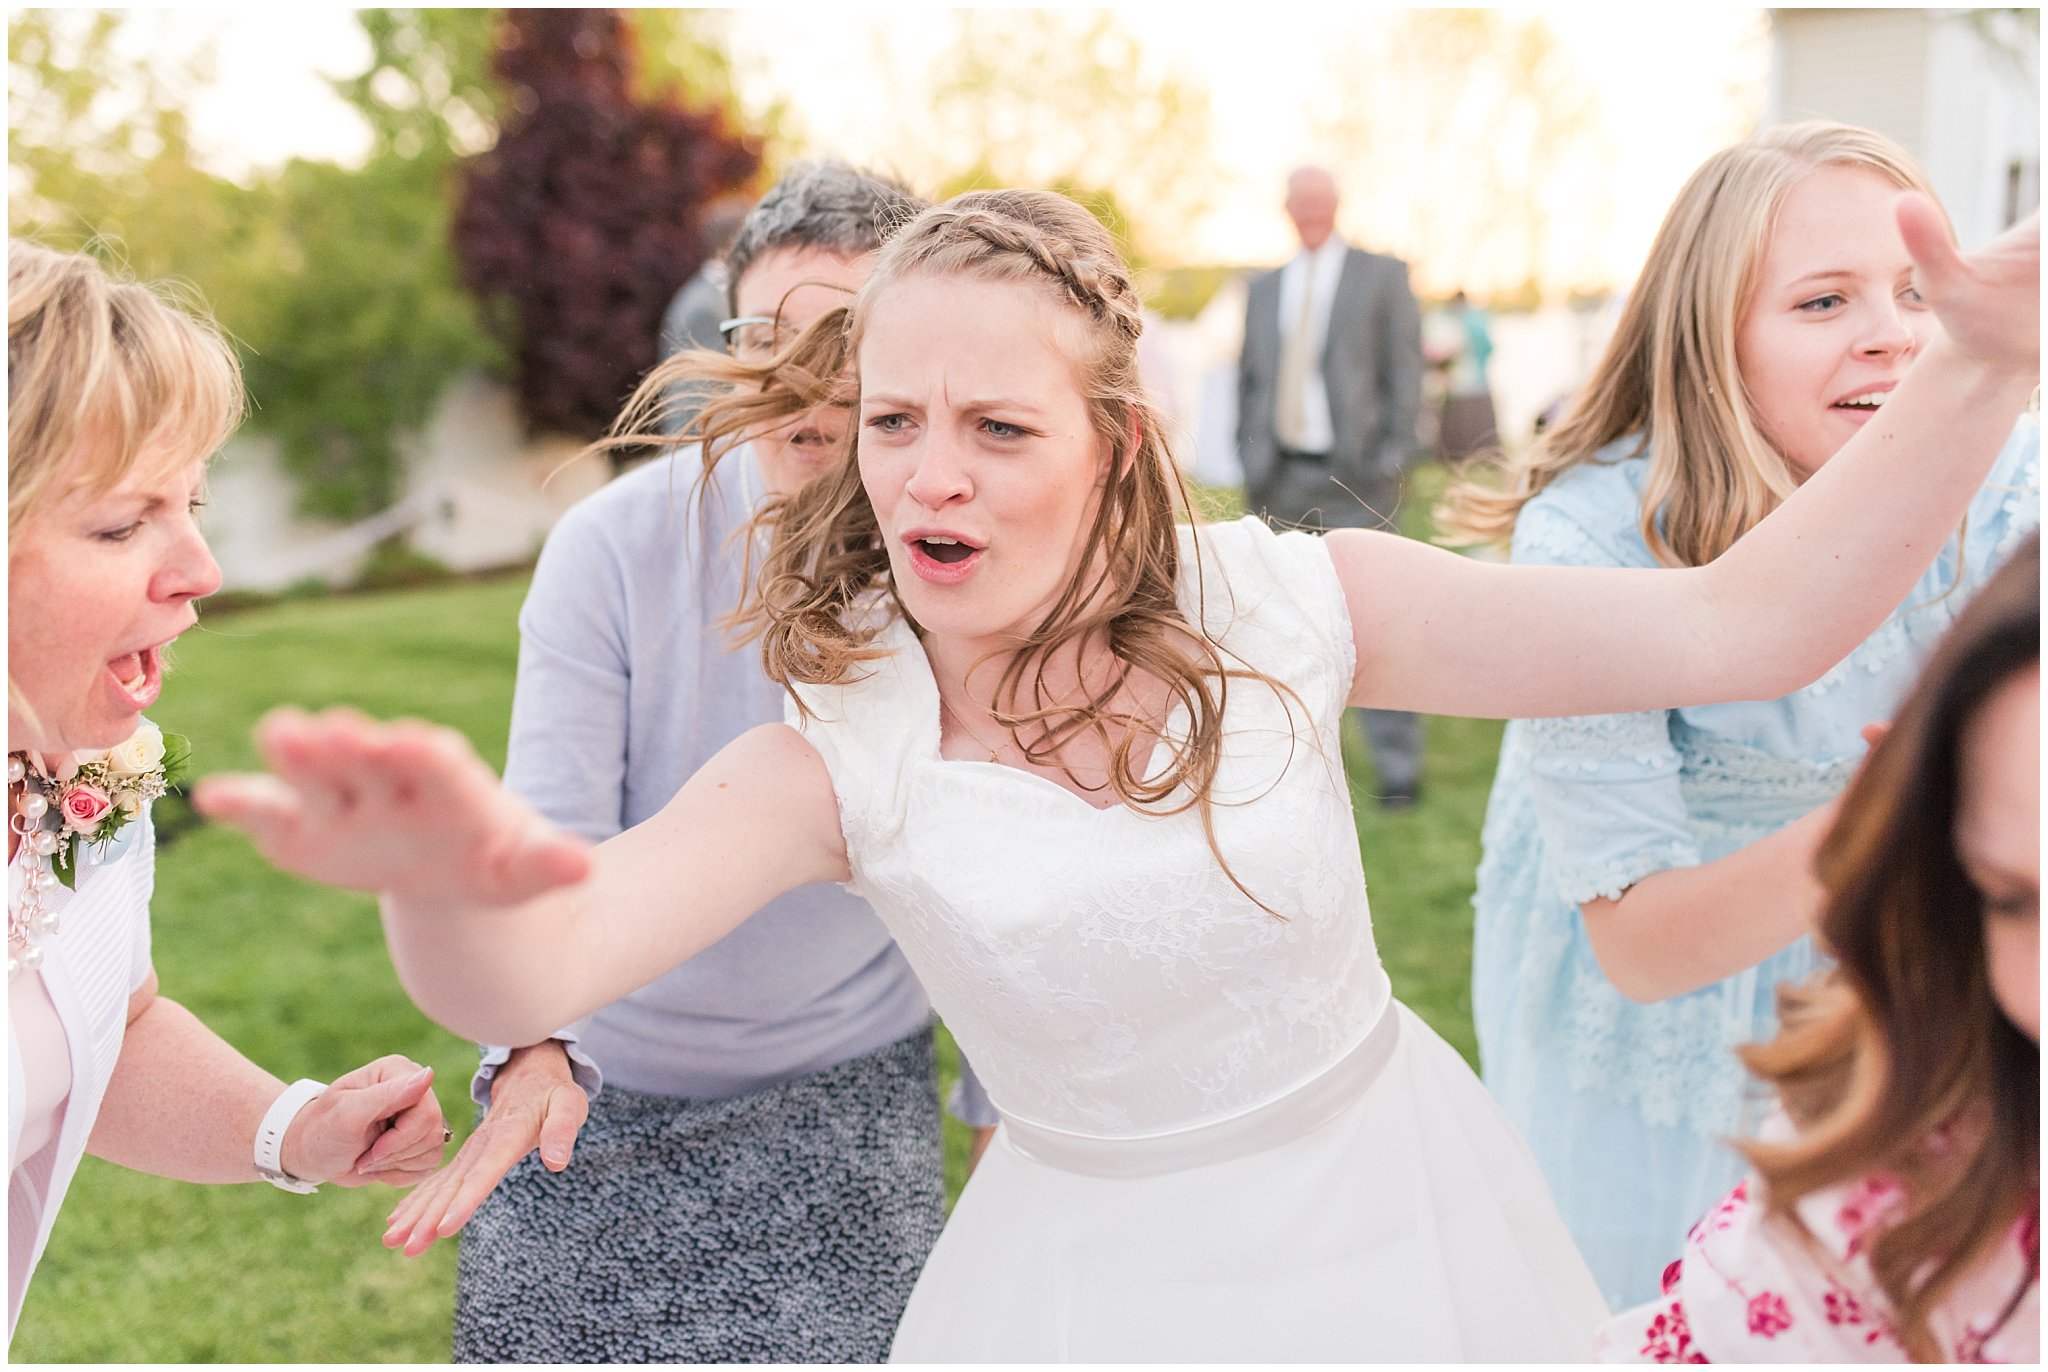 Fun backyard party dancing | Backyard outdoor spring wedding with grey, blush, and light blue wedding colors | Spring Provo City Center Temple Wedding | Utah Wedding Photographers | Jessie and Dallin Photography